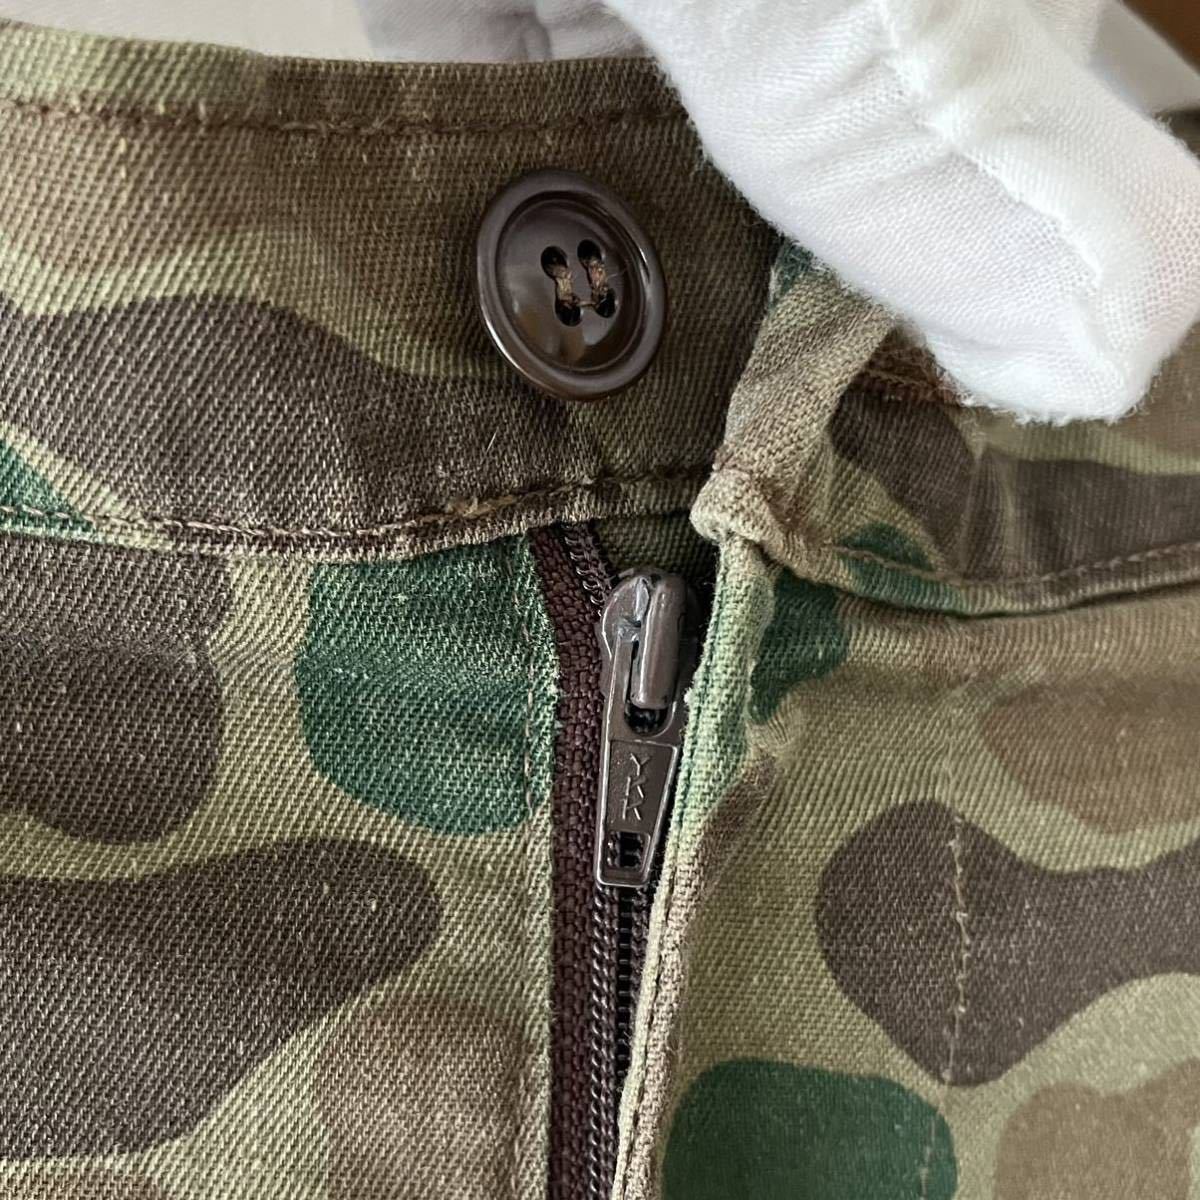 80s WOOLRICH green duck utility pants S USA made Vintage 80 period Woolrich camouflage America made original Vintage 